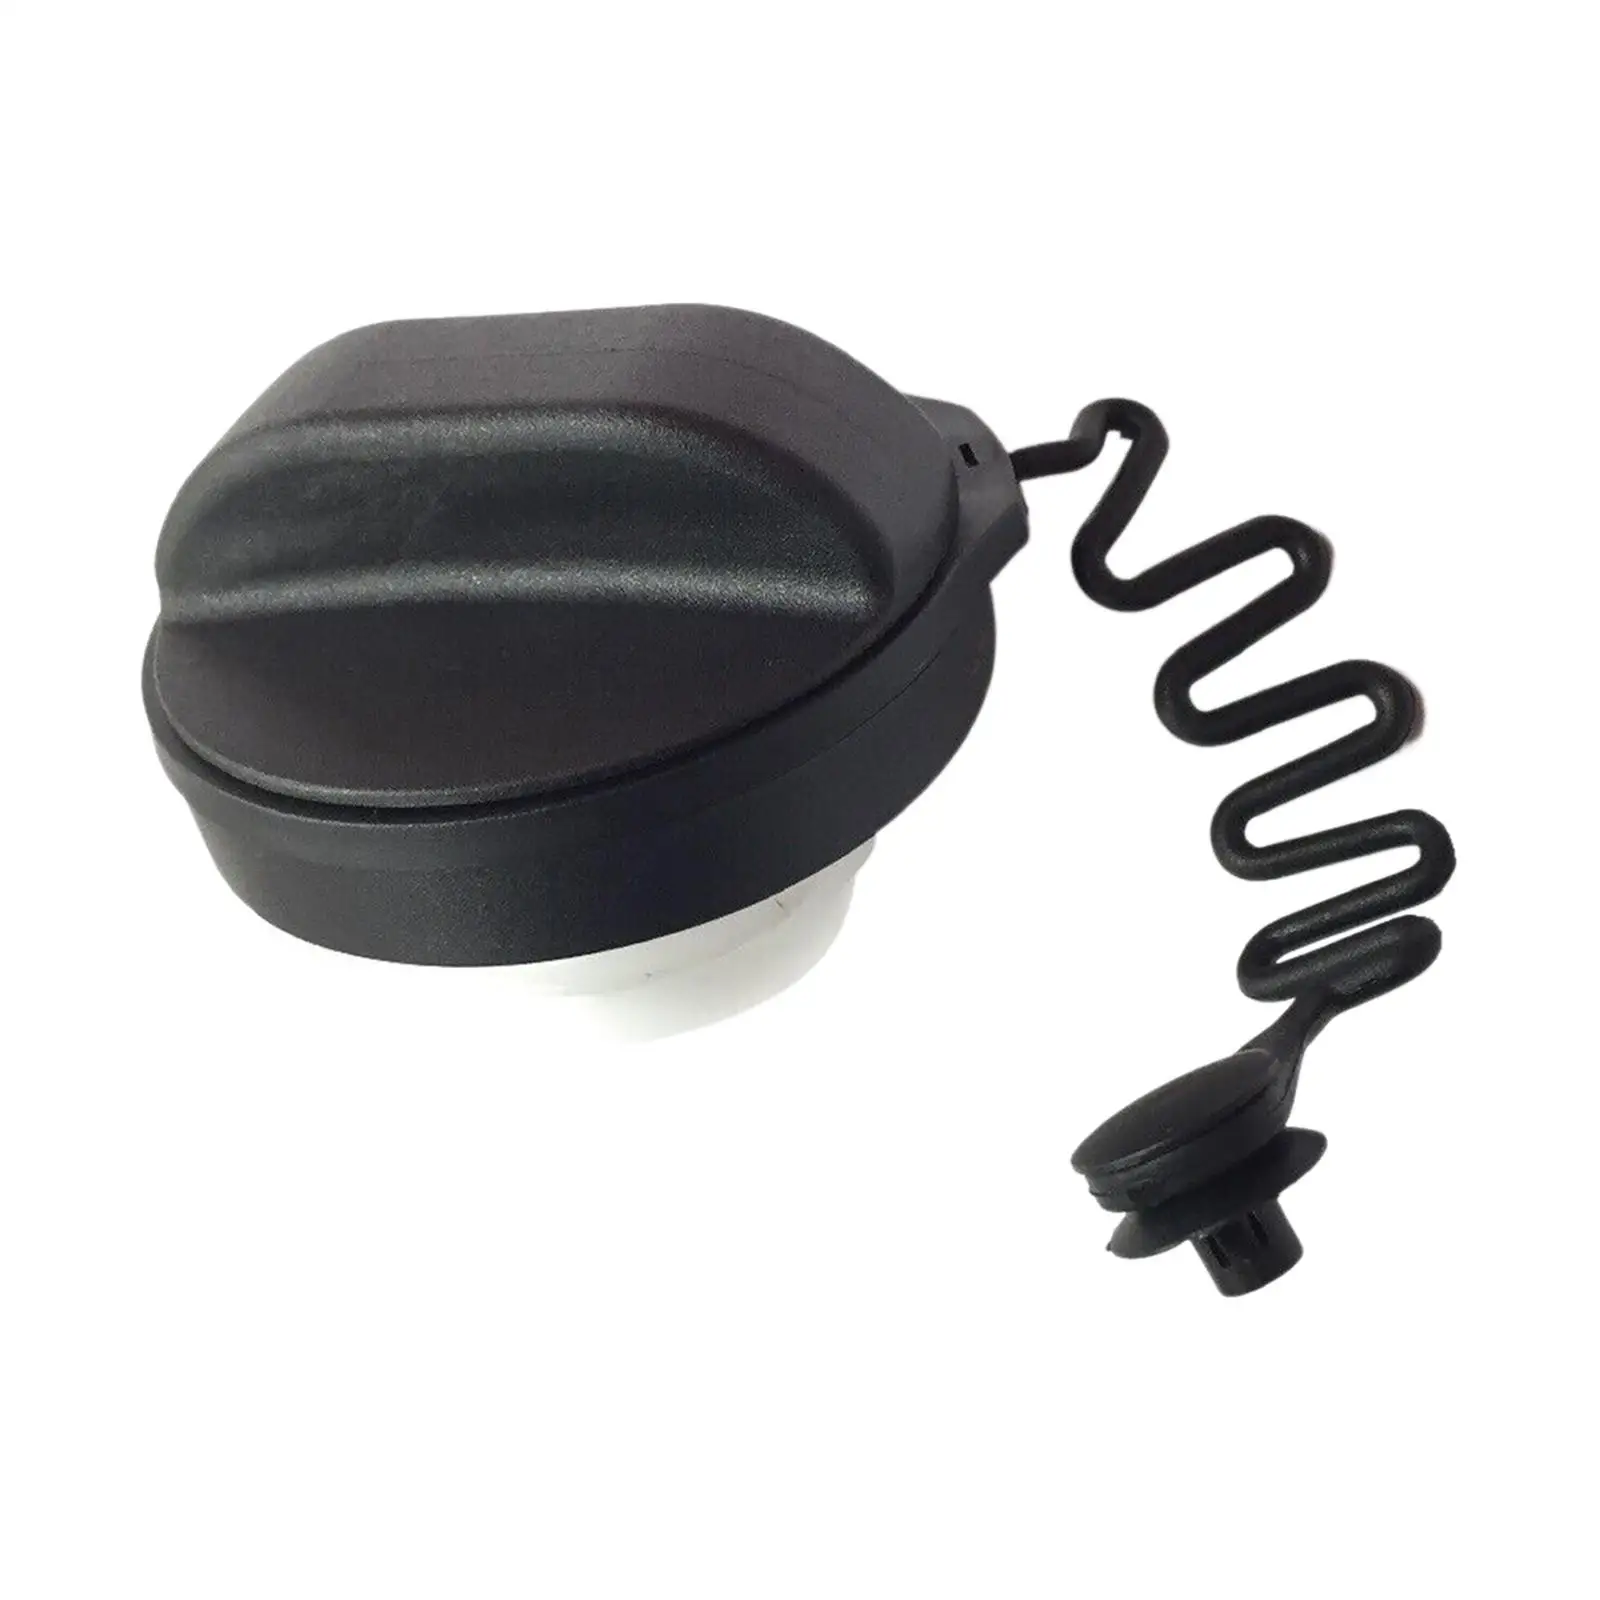 Fuel Filler Cap Car Accessories, Replacement Gas Cap for Models with Screw in